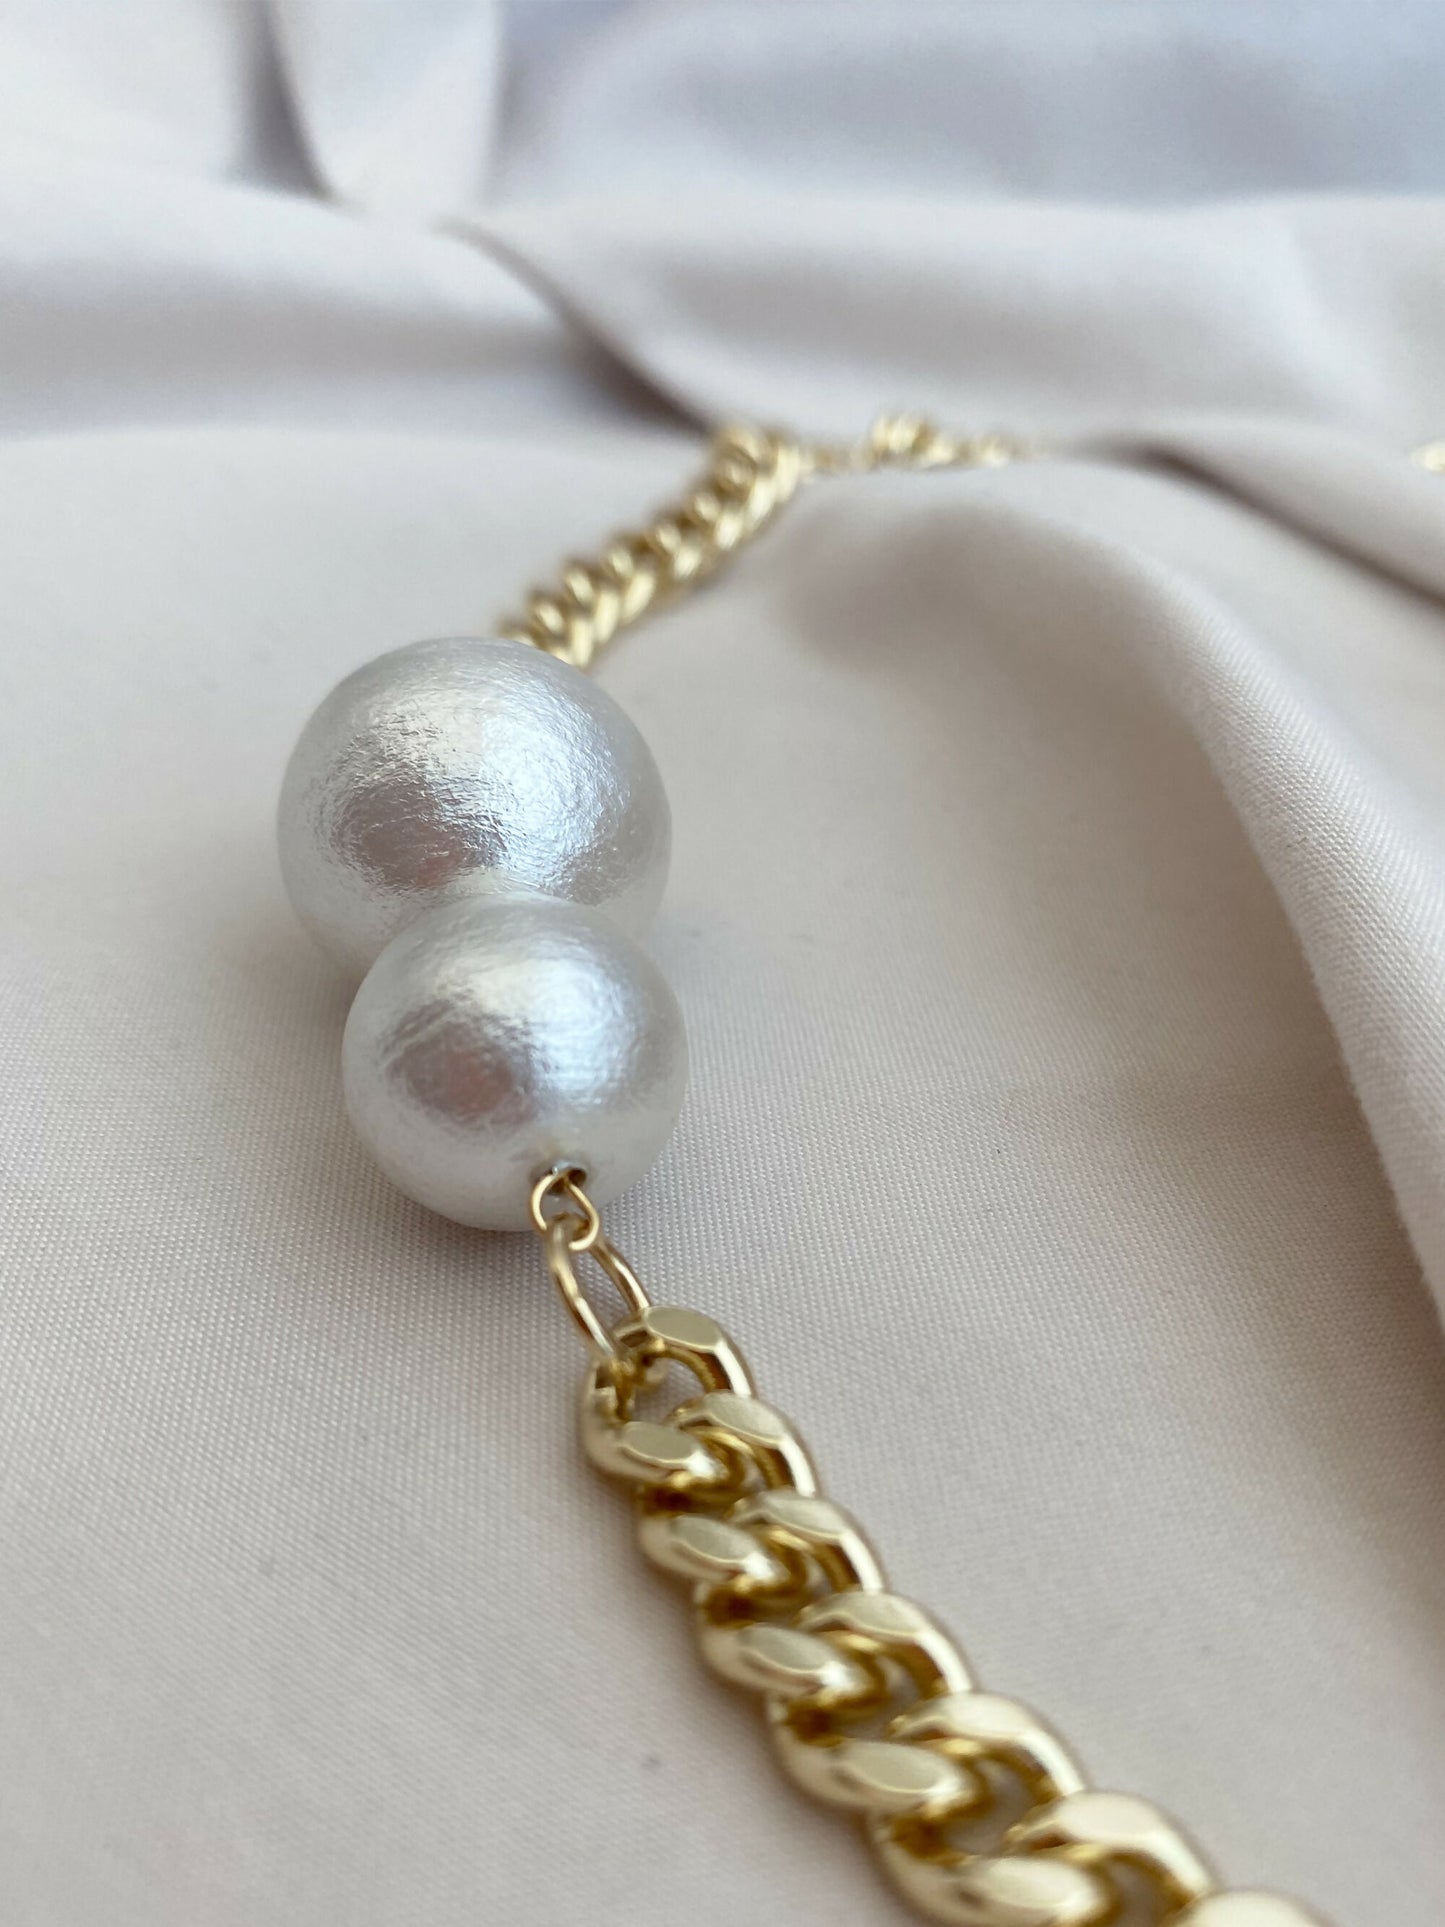 Necklace With Japanese Cotton Pearls In Gold Tone